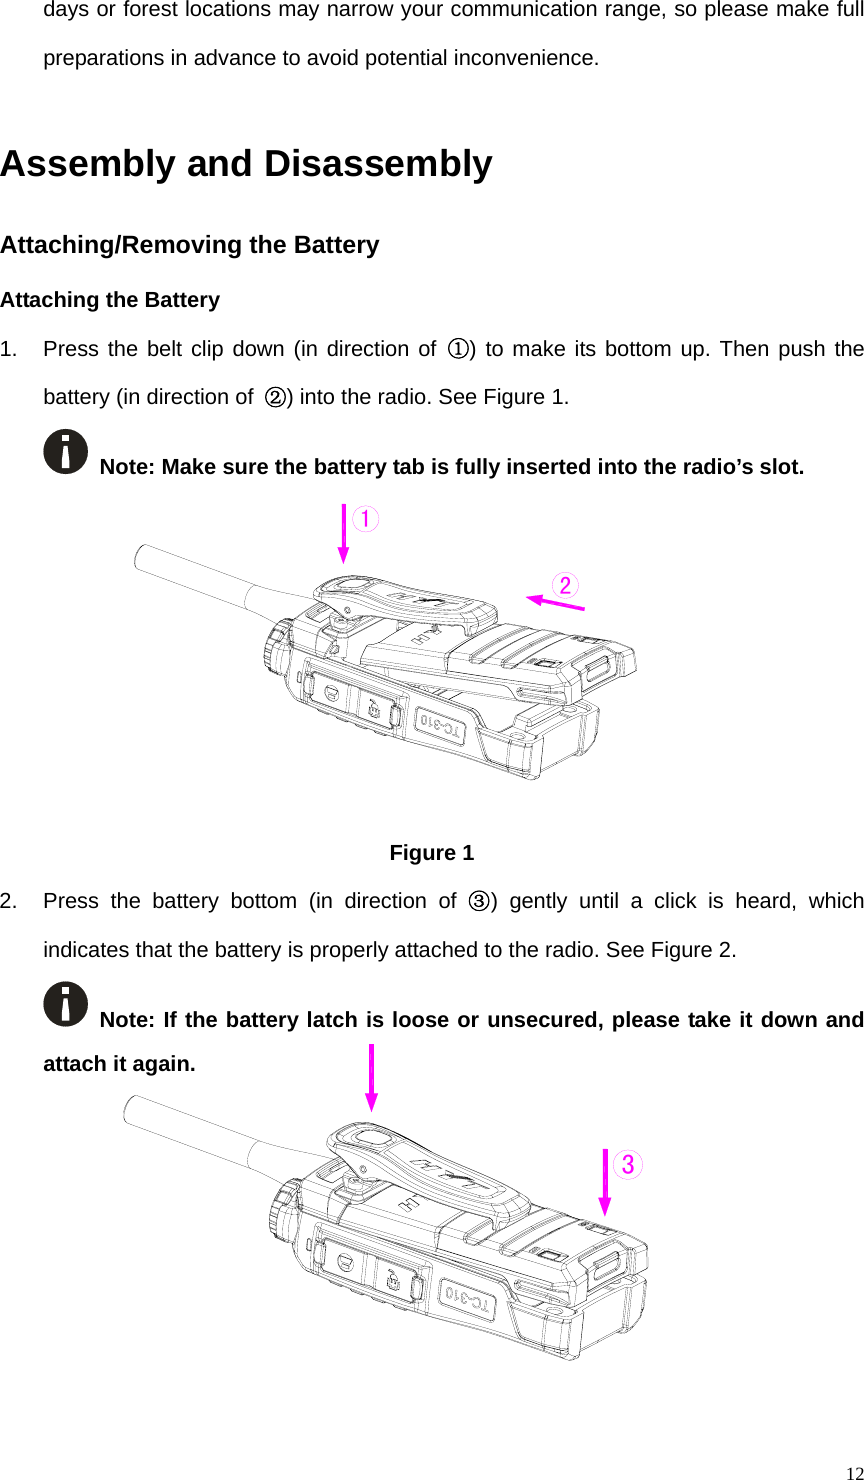   12days or forest locations may narrow your communication range, so please make full preparations in advance to avoid potential inconvenience.    Assembly and Disassembly   Attaching/Removing the Battery   Attaching the Battery 1.  Press the belt clip down (in direction of ①) to make its bottom up. Then push the battery (in direction of  ②) into the radio. See Figure 1.    Note: Make sure the battery tab is fully inserted into the radio’s slot.          Figure 1   2.  Press the battery bottom (in direction of ③) gently until a click is heard, which indicates that the battery is properly attached to the radio. See Figure 2.    Note: If the battery latch is loose or unsecured, please take it down and attach it again.          213